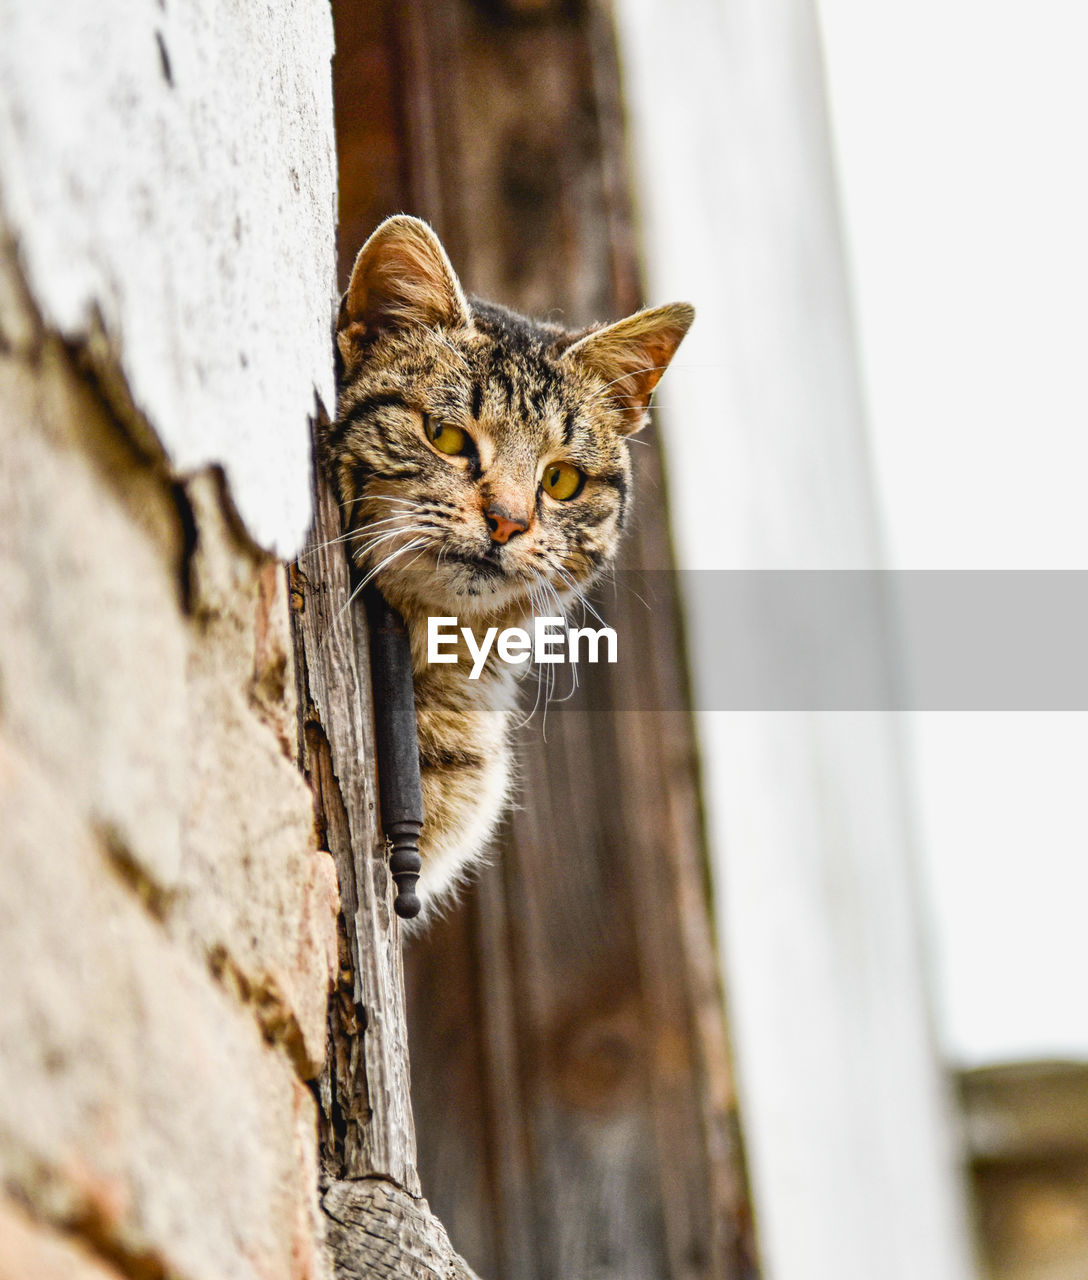 CLOSE-UP OF A CAT LOOKING AWAY AGAINST WALL